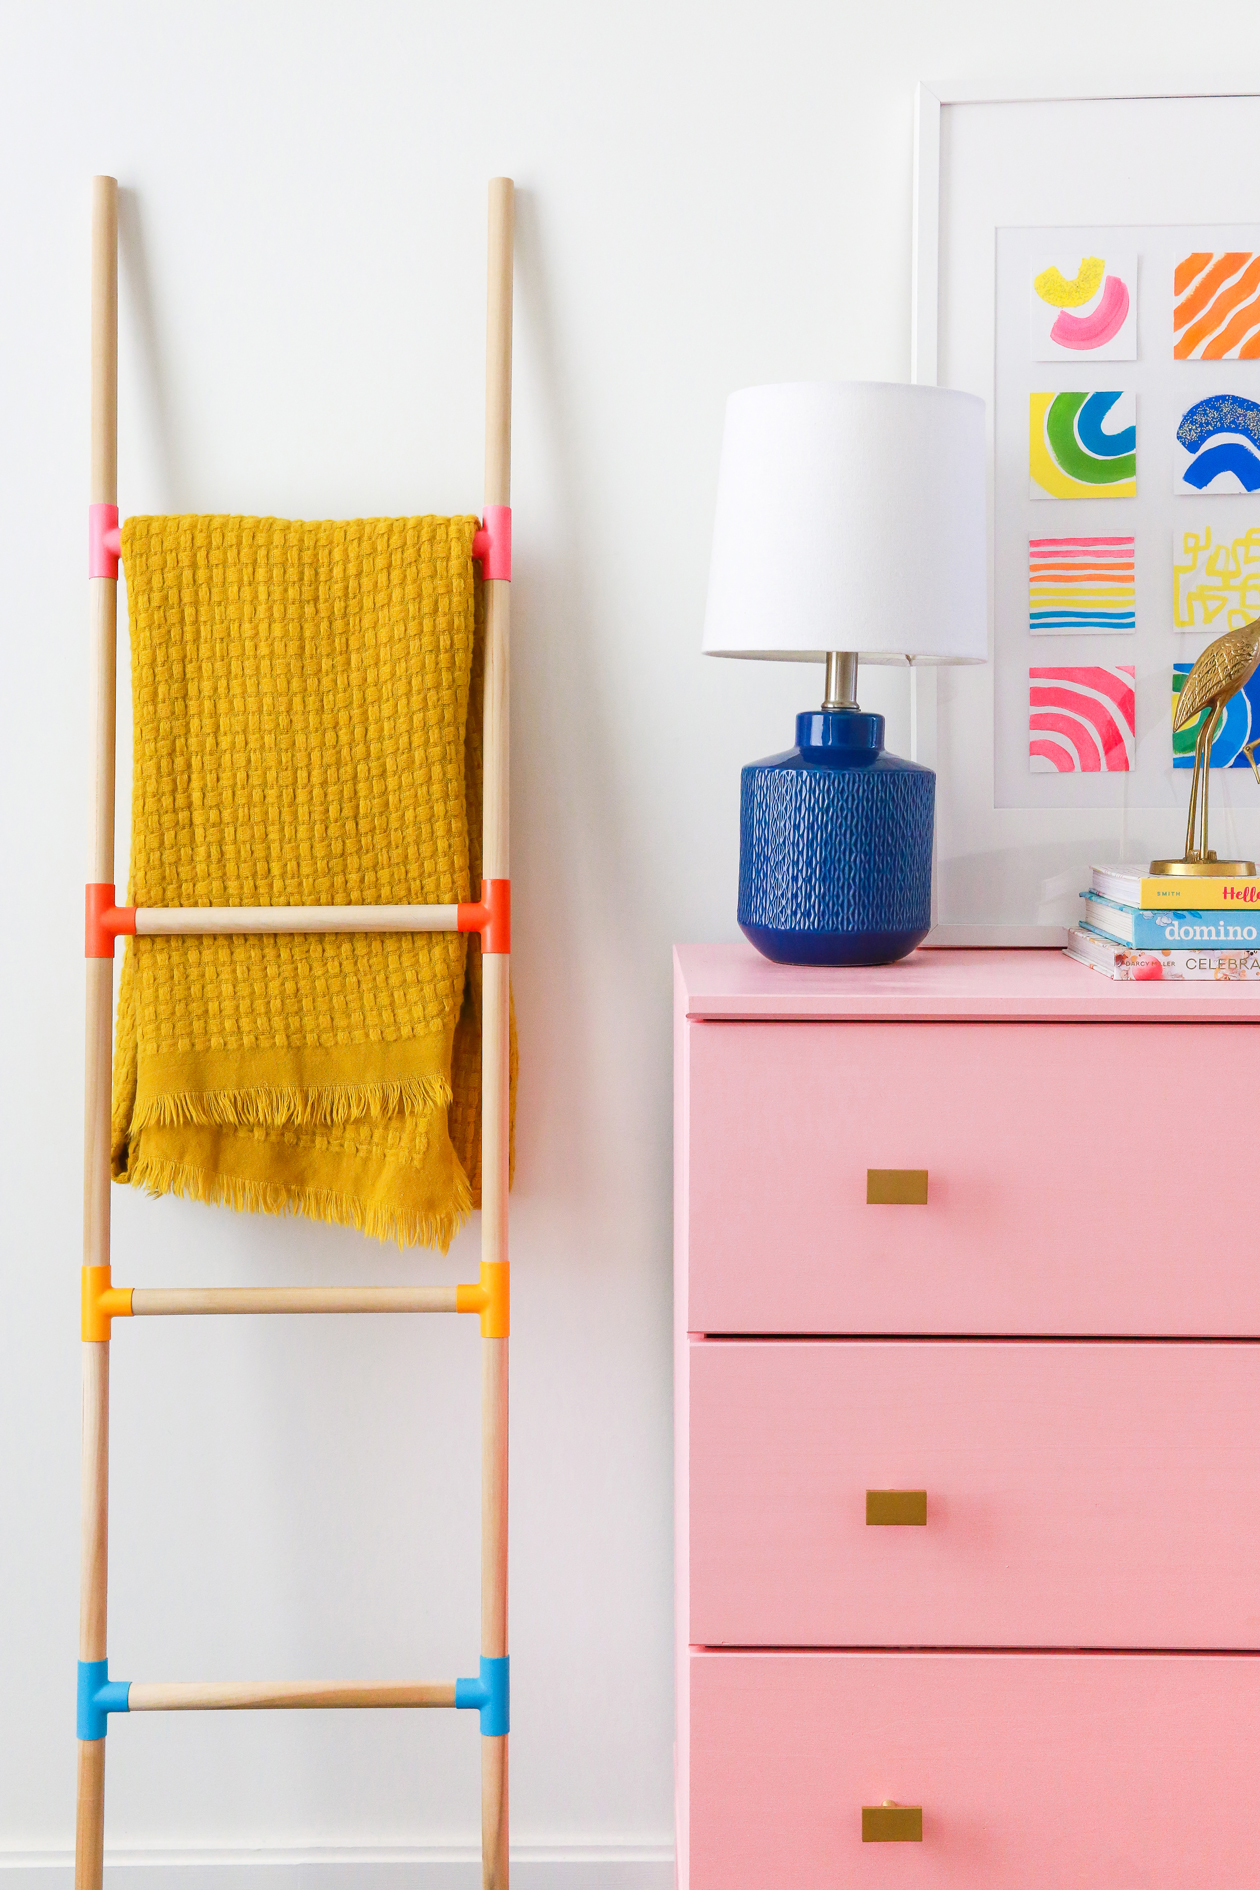 Create a place to store your blankets and bring some color to your home with this easy project! This DIY Wooden Dowel Blanket Ladder is perfect for winter and fall!